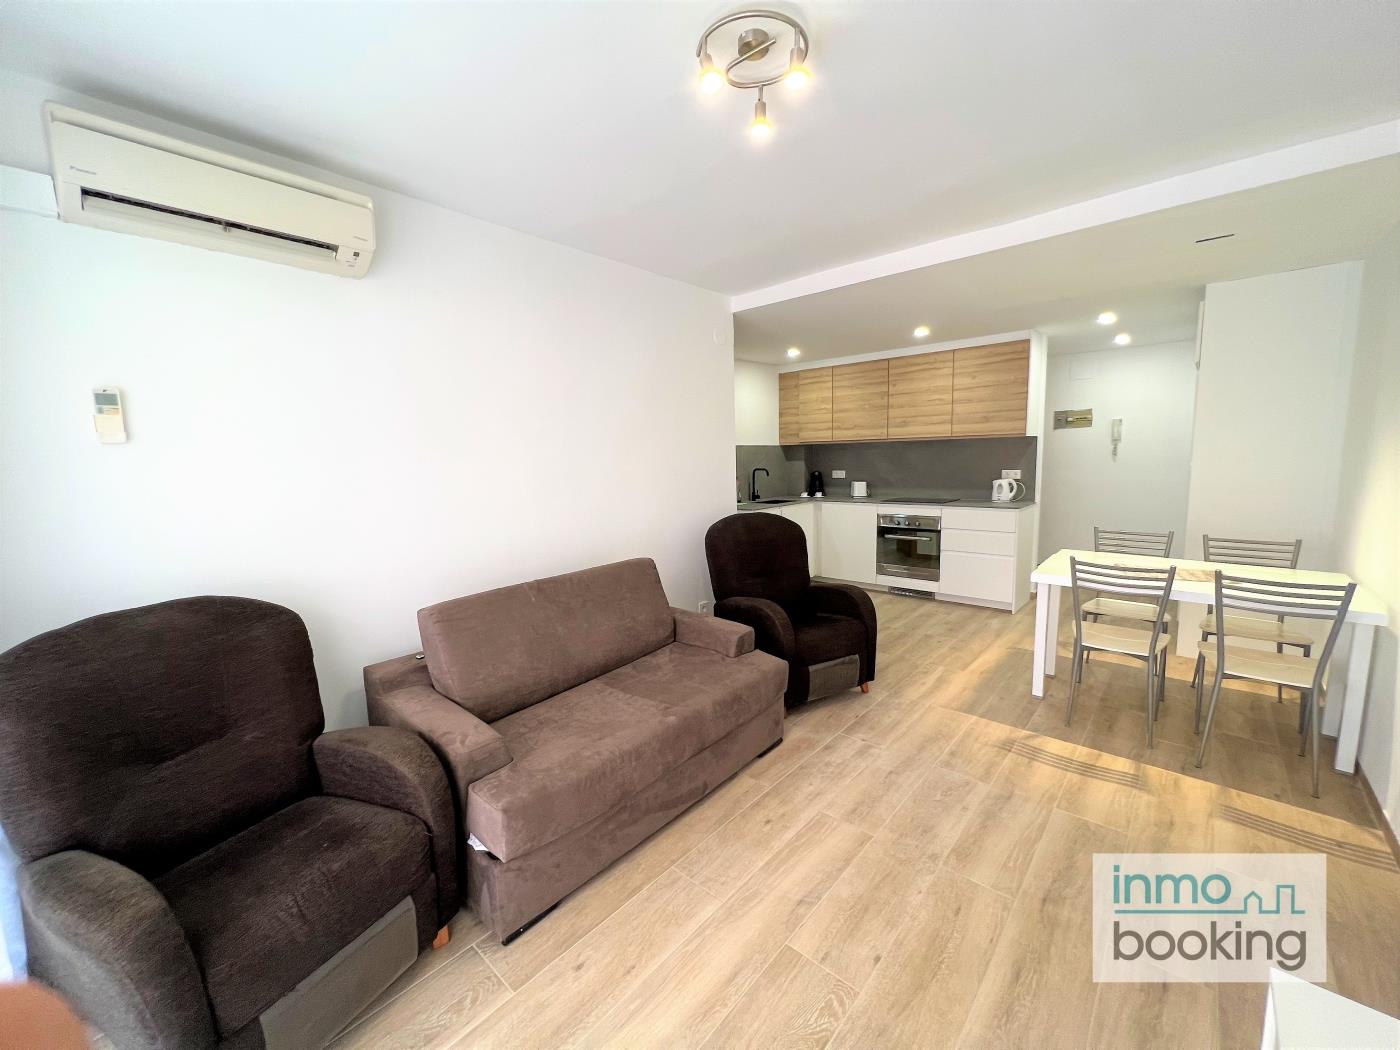 Nice apartment in the heart of Salou. Air-conditioned and close to the beach in Salou